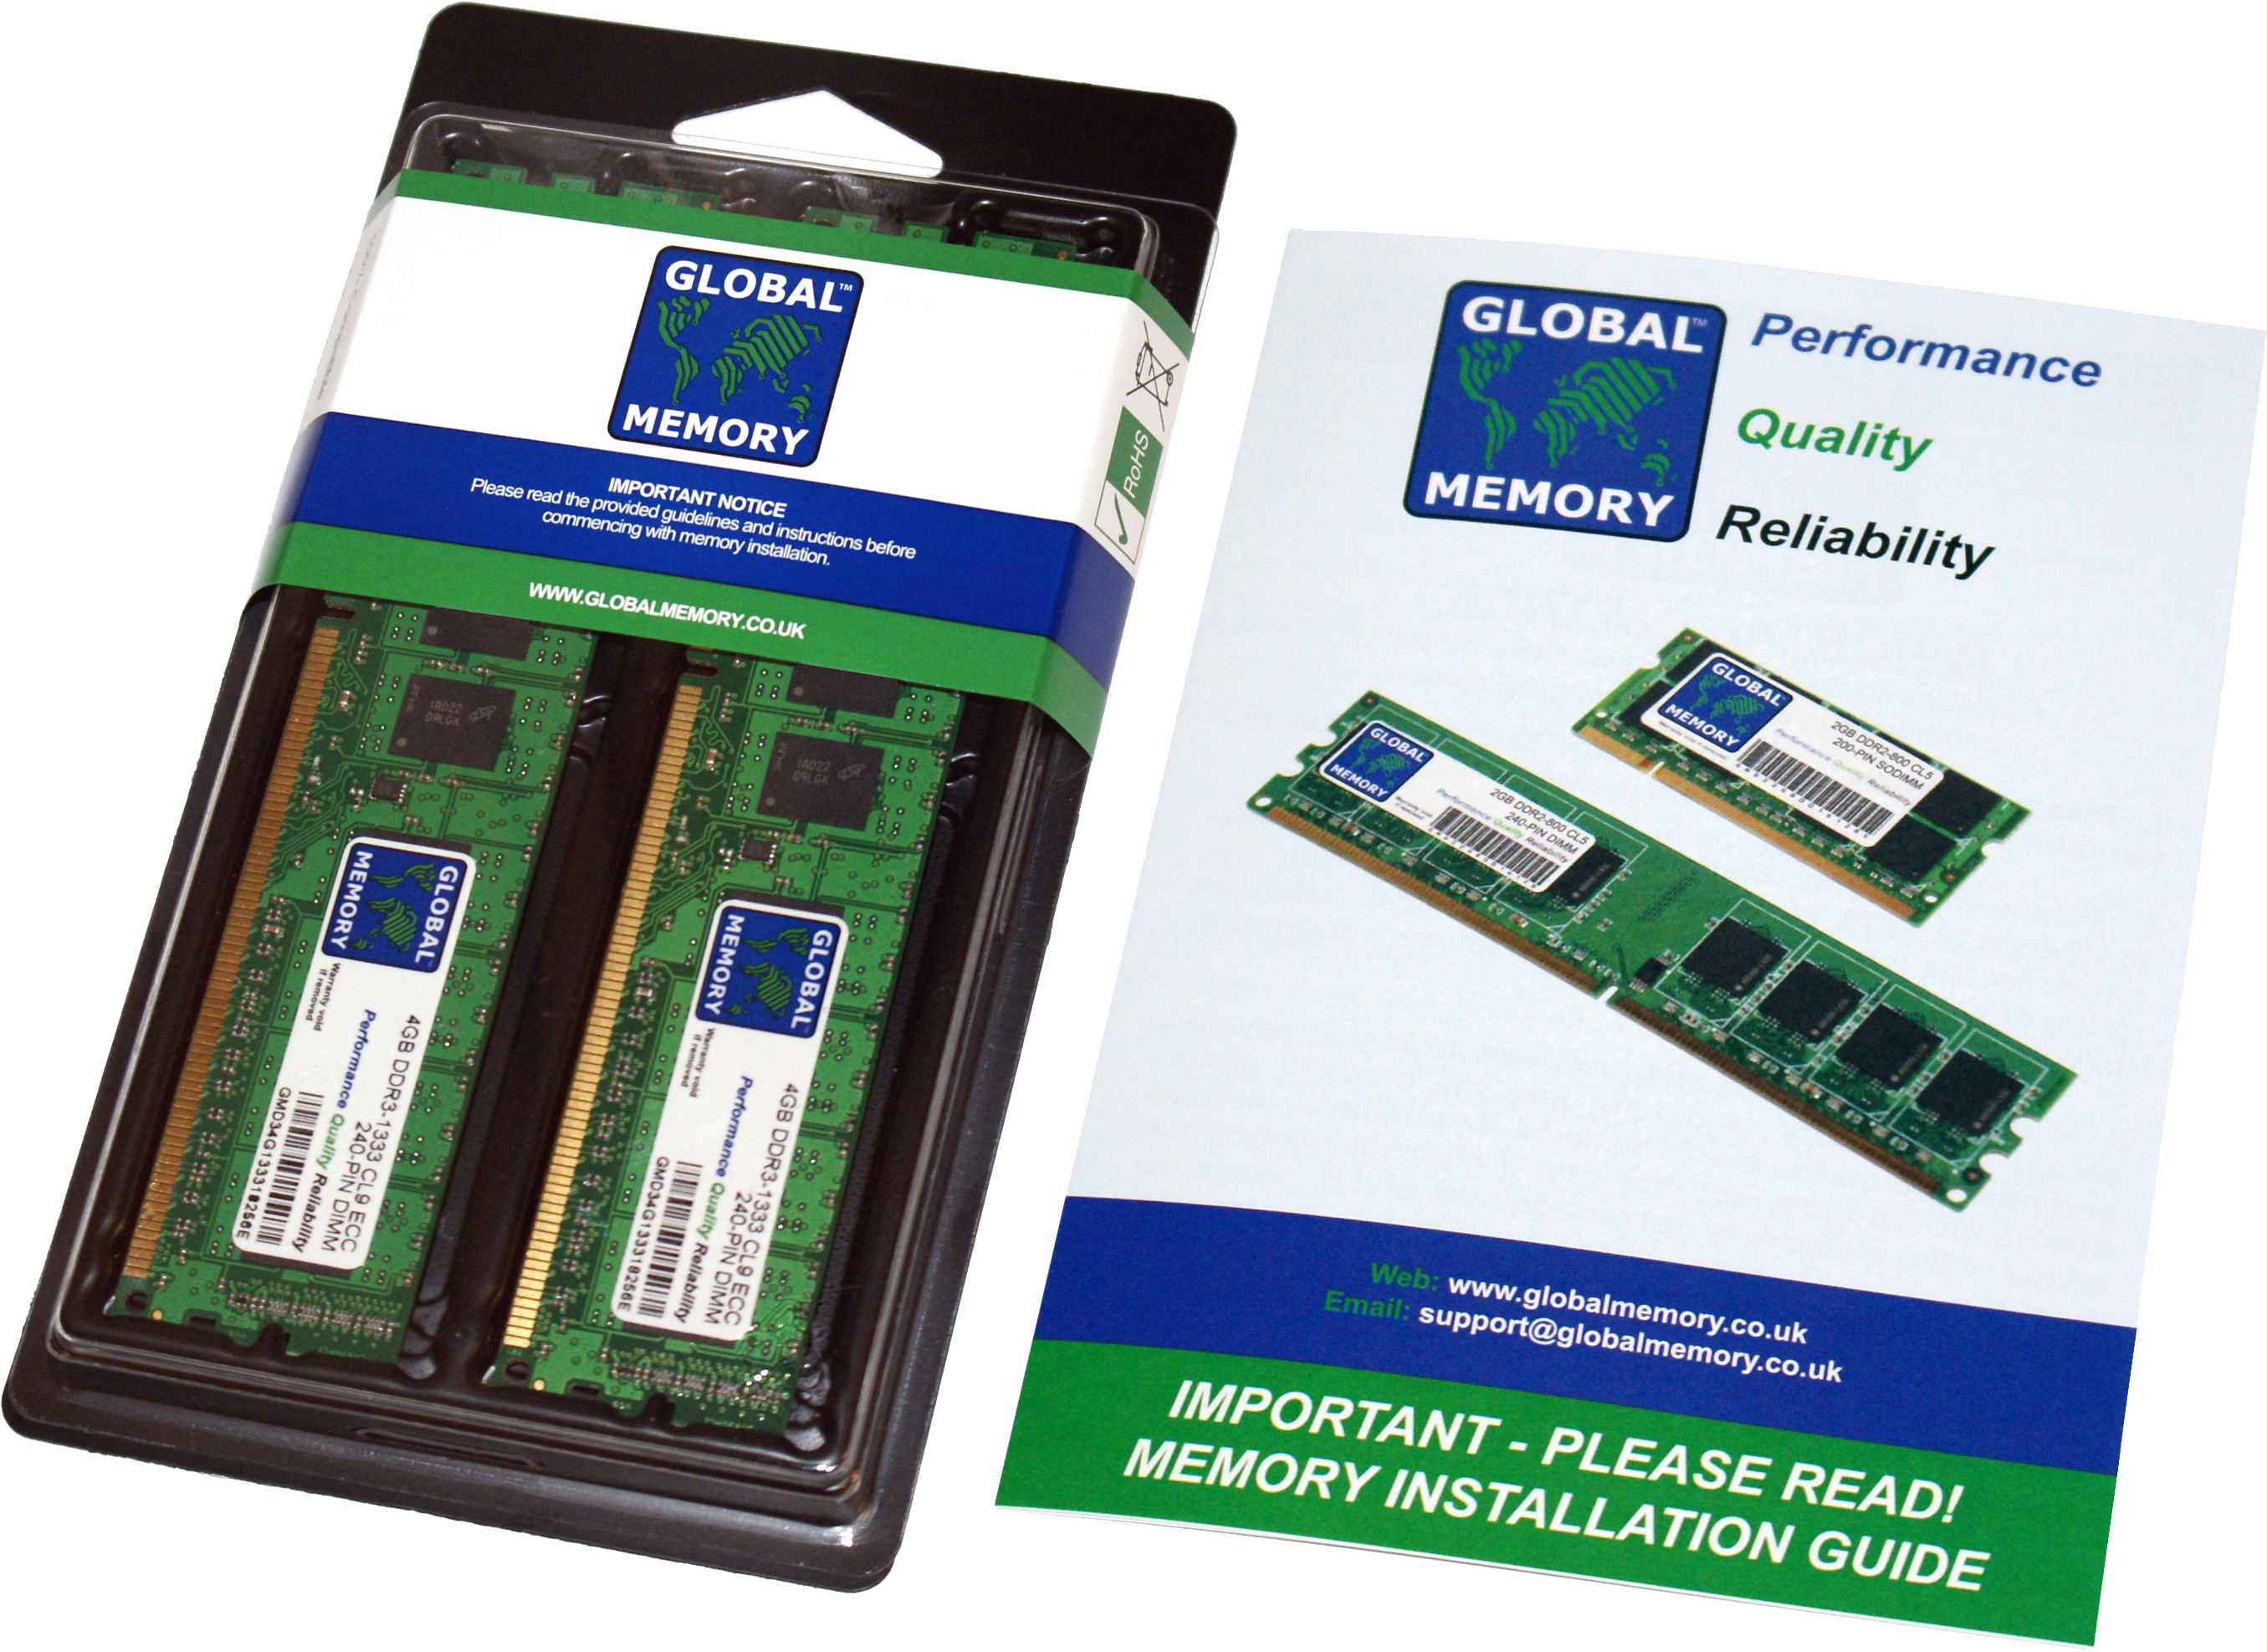 16GB (2 x 8GB) DDR3 1866MHz PC3-14900 240-PIN ECC DIMM (UDIMM) MEMORY RAM KIT FOR ACER SERVERS/WORKSTATIONS